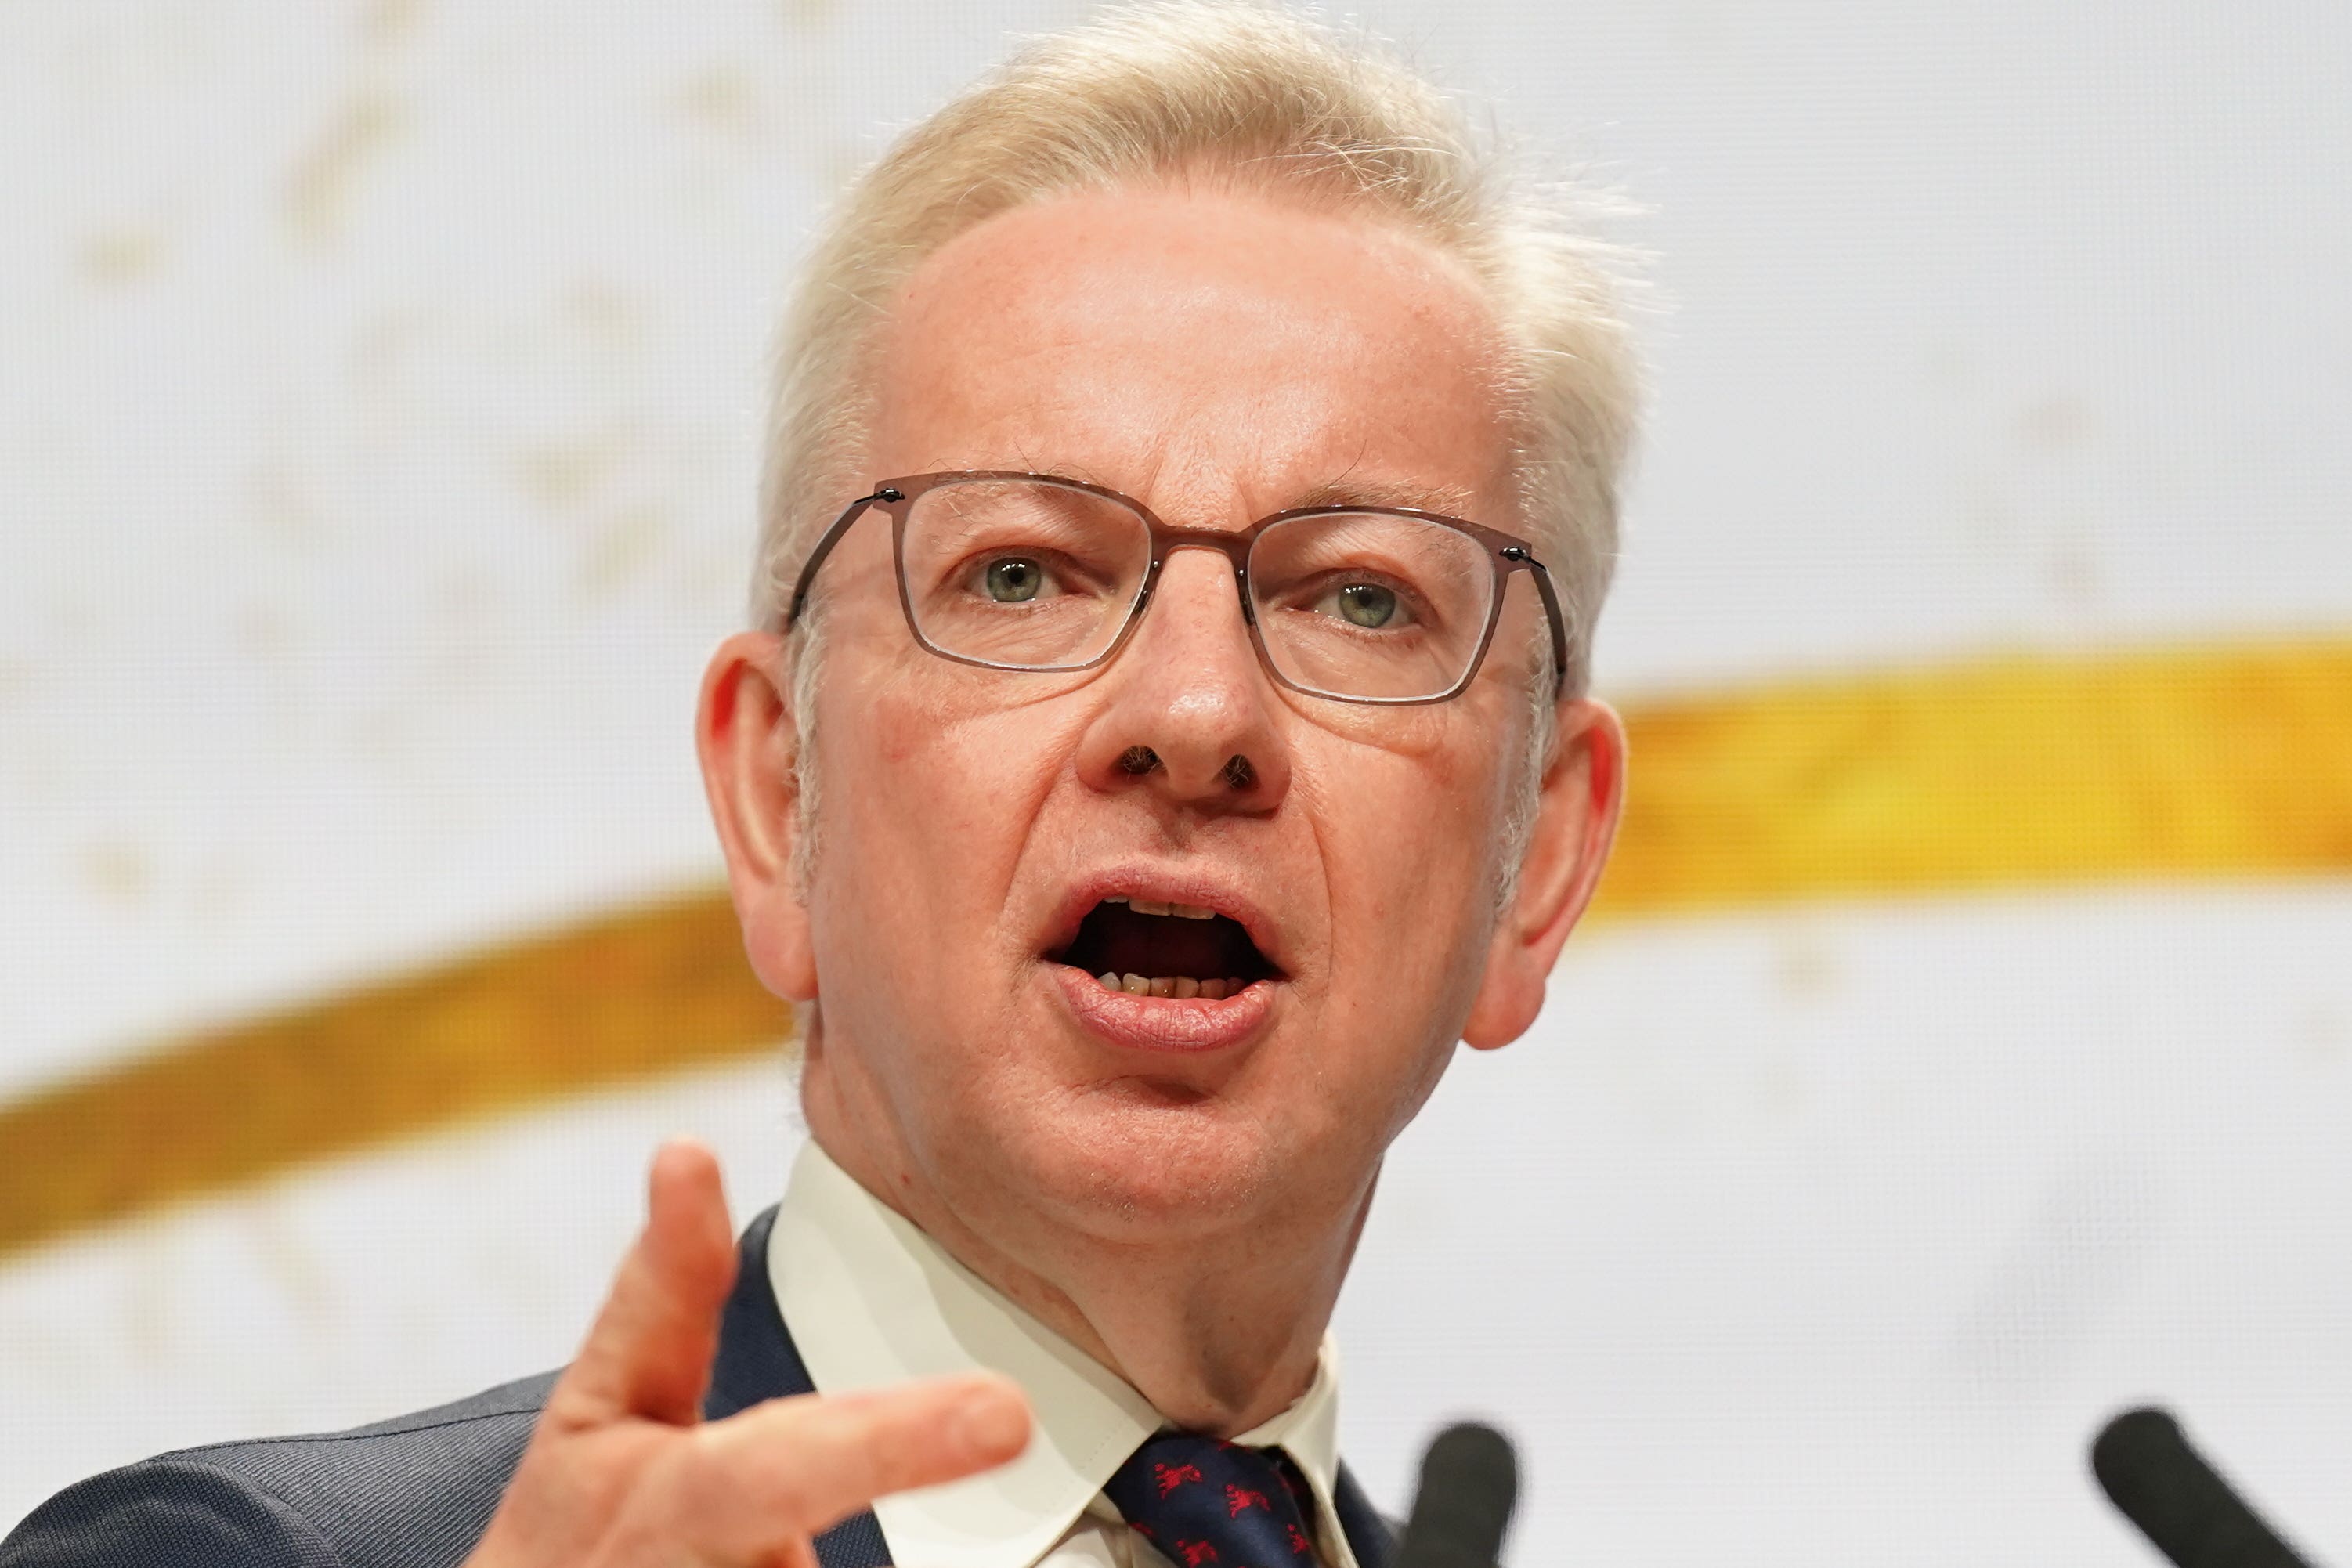 Gove is set to announce a 6.5% increase in funding for councils in England, according to reports (Stefan Rousseau/PA)